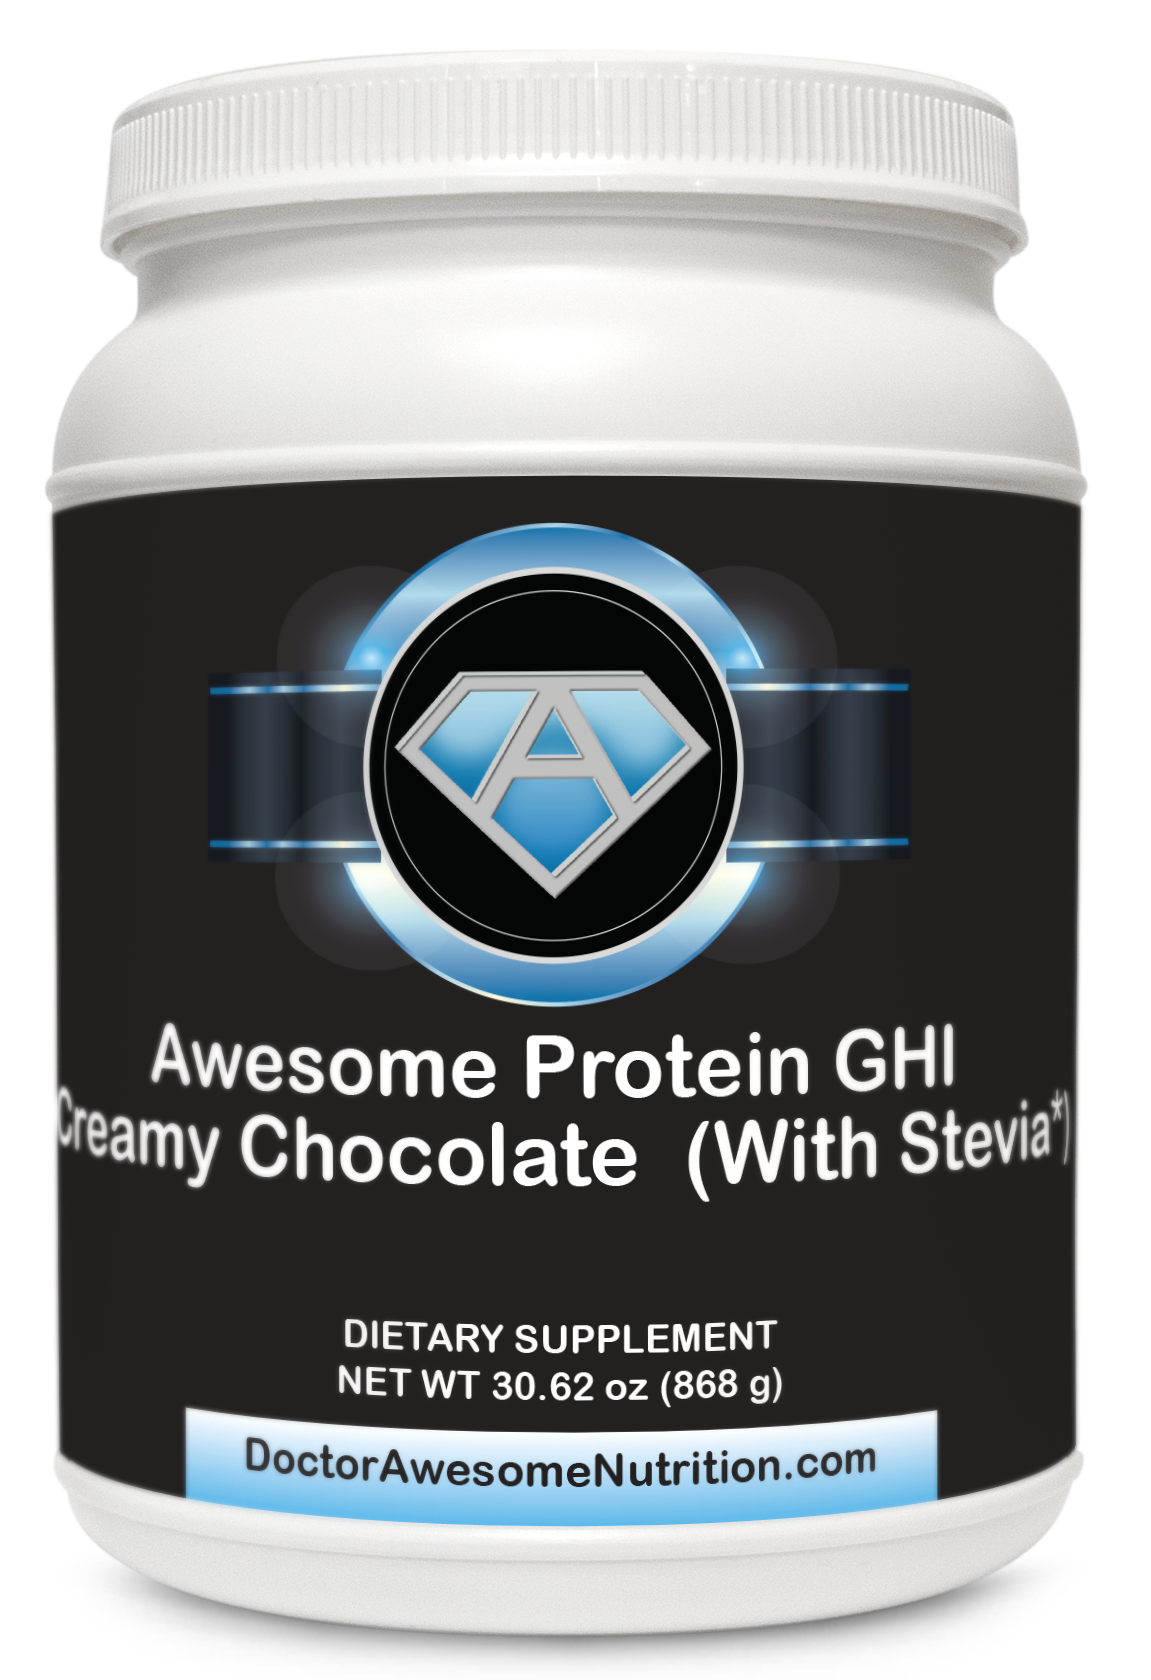 Awesome Protein GHI (Chocolate W/ Stevia)